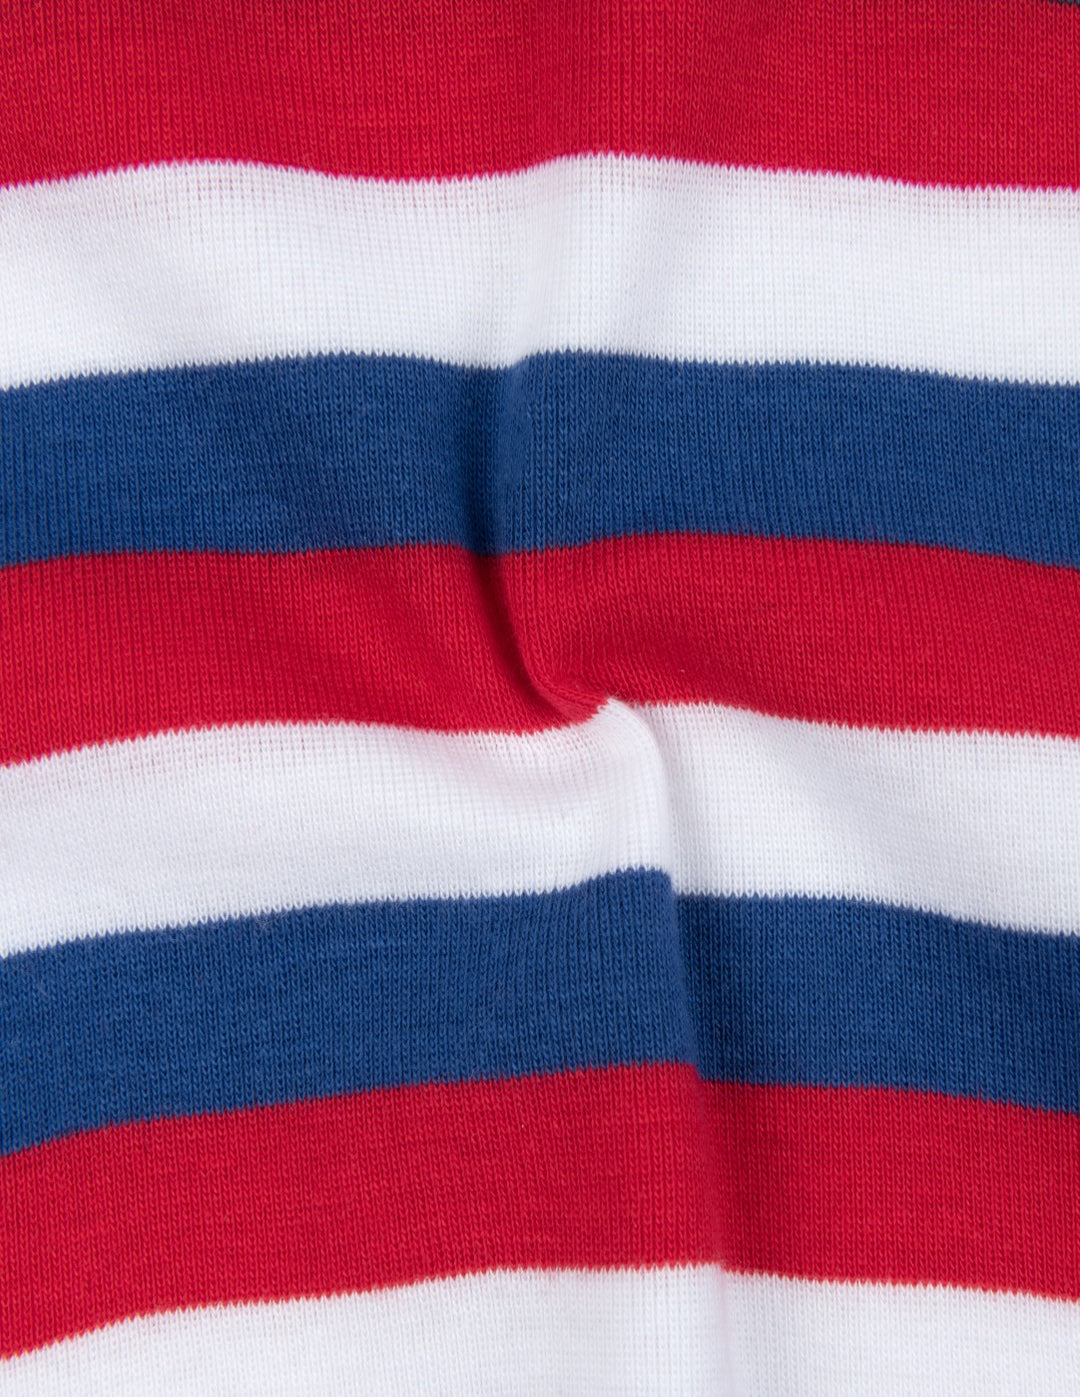 Baby footed red white and blue striped pajamas